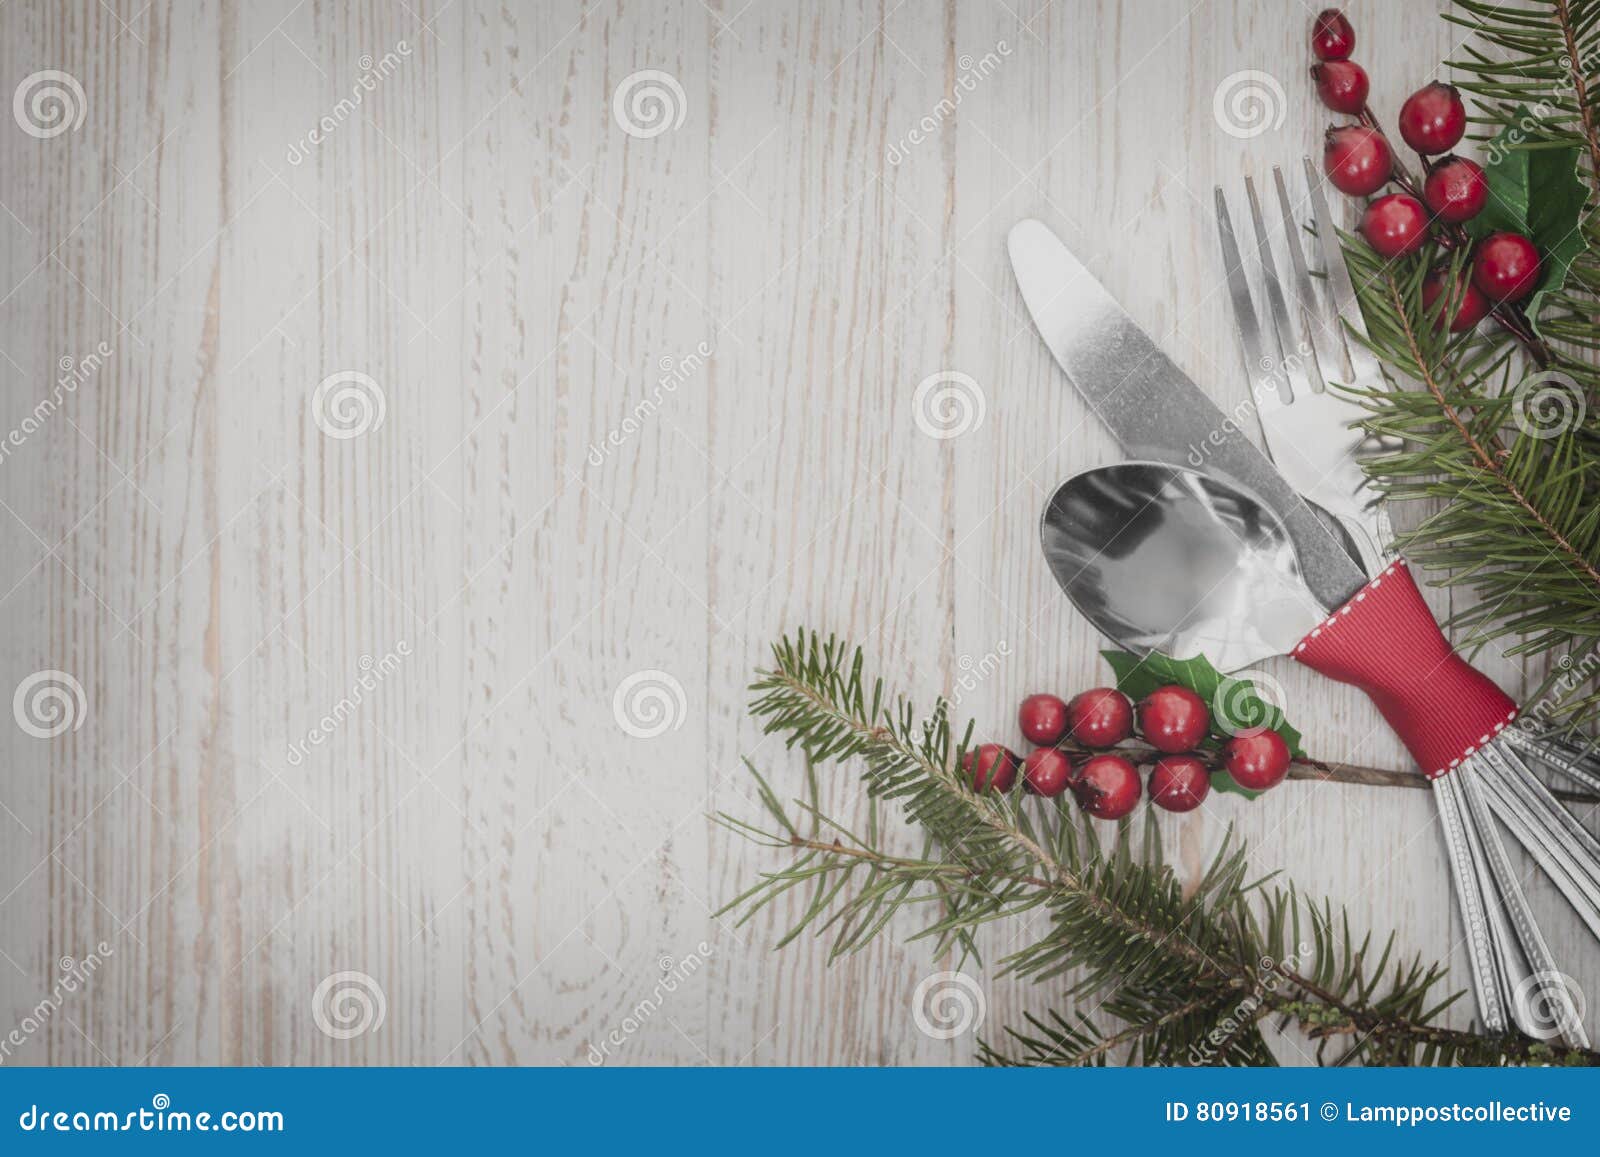 Christmas Meal Table Setting Background Stock Image - Image of knife ...